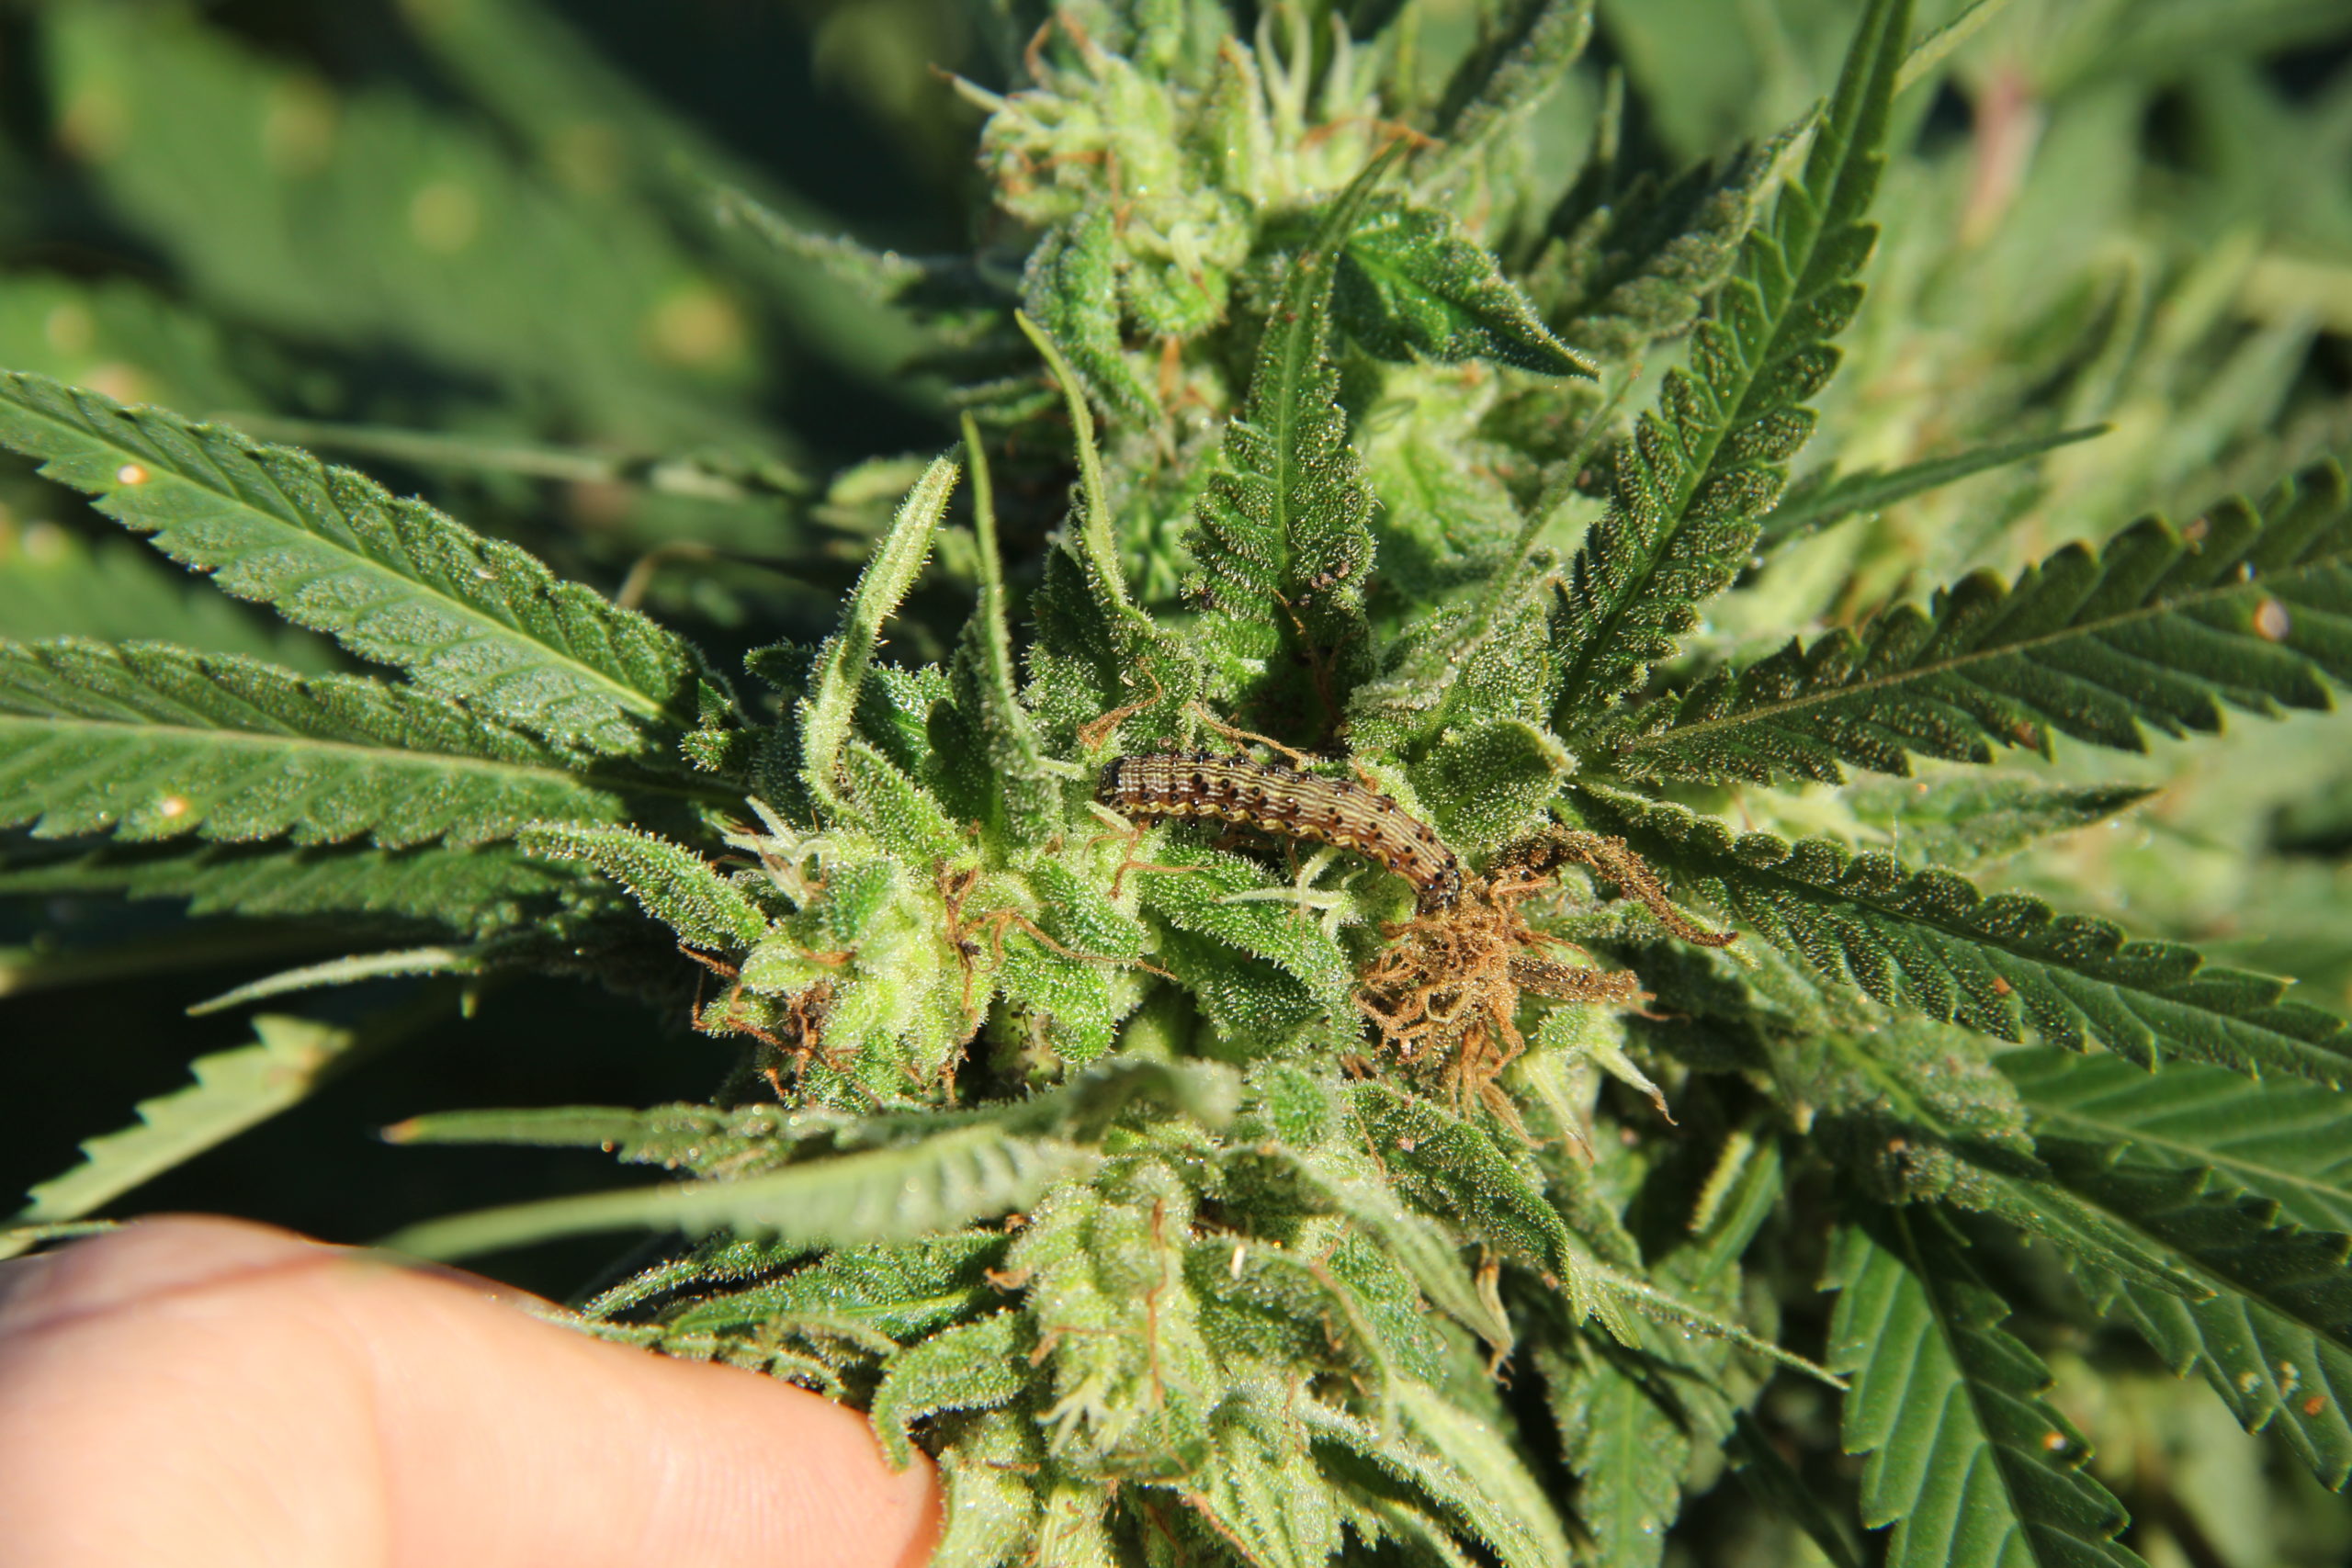 Image of a worm on a hemp leaves